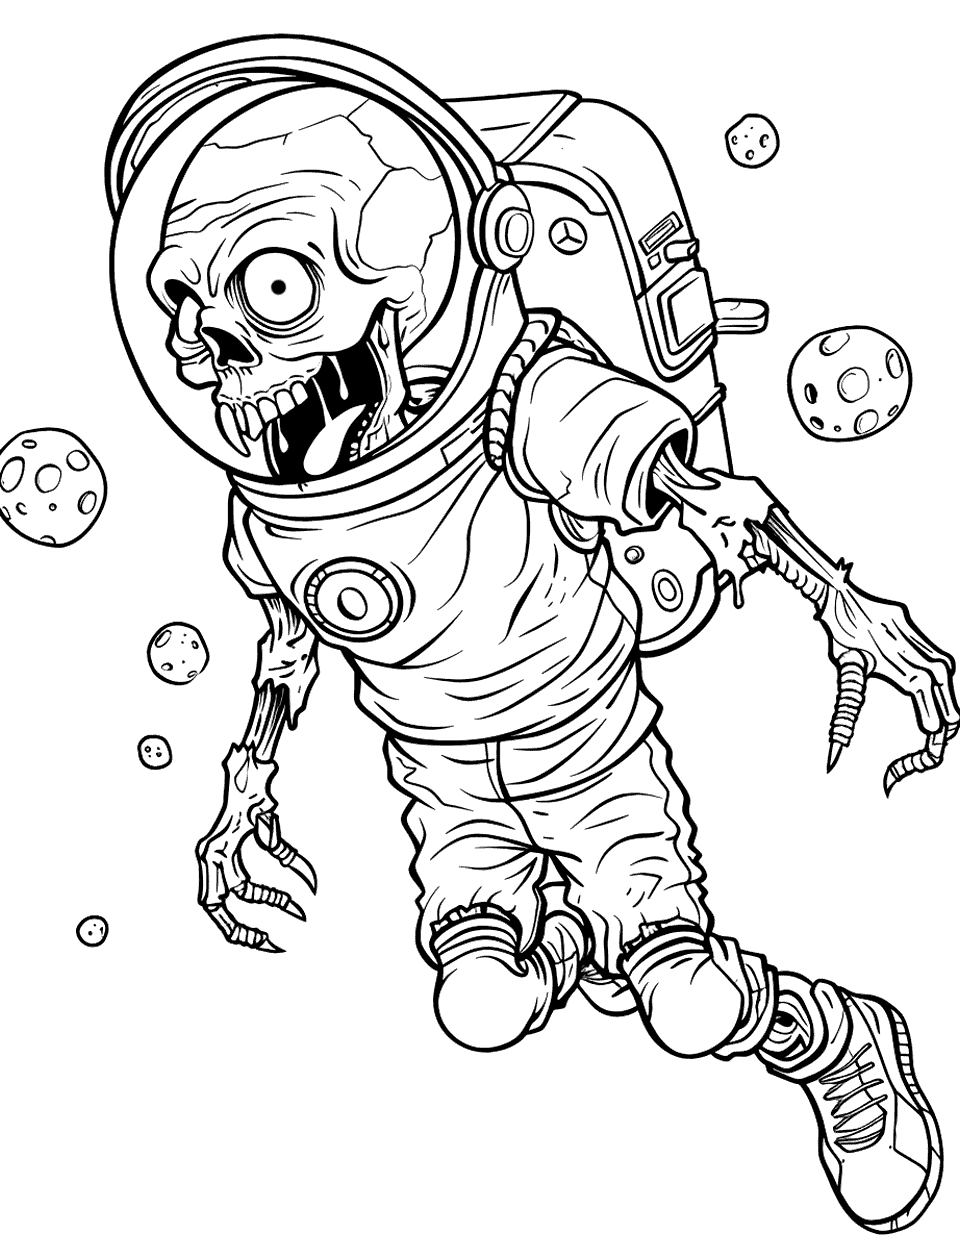 Zombie Astronaut in Space Coloring Page - A zombie astronaut floating in space.